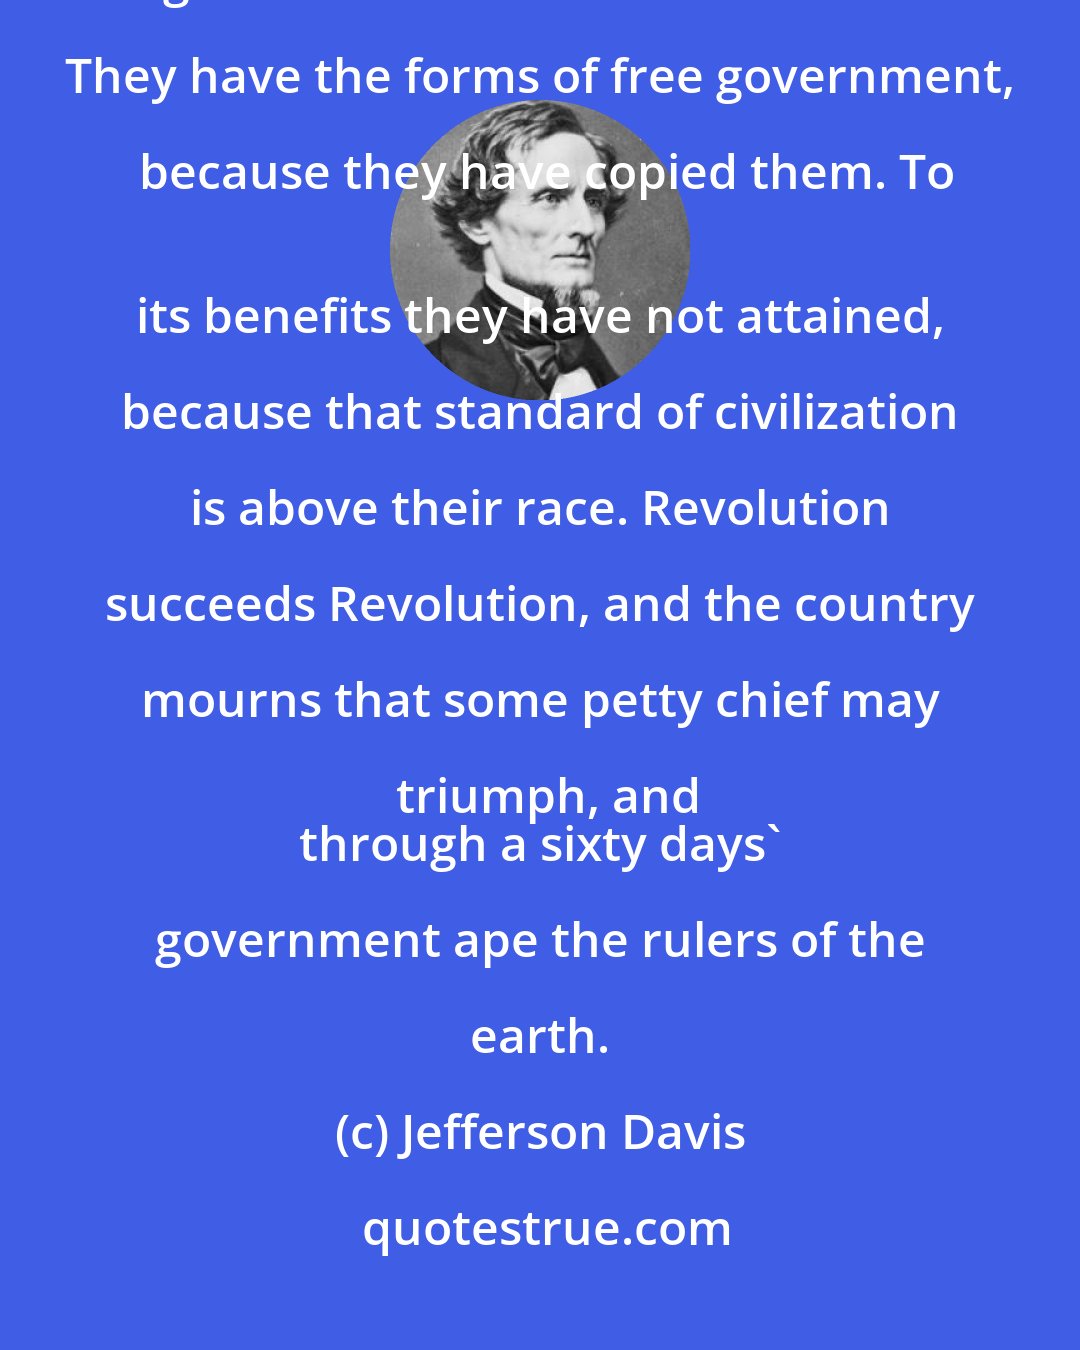 Jefferson Davis: Among our neighbors of Central and Southern America, we see the Caucasian mingled with the Indian and the African. They have the forms of free government, because they have copied them. To
 its benefits they have not attained, because that standard of civilization is above their race. Revolution succeeds Revolution, and the country mourns that some petty chief may triumph, and
 through a sixty days' government ape the rulers of the earth.